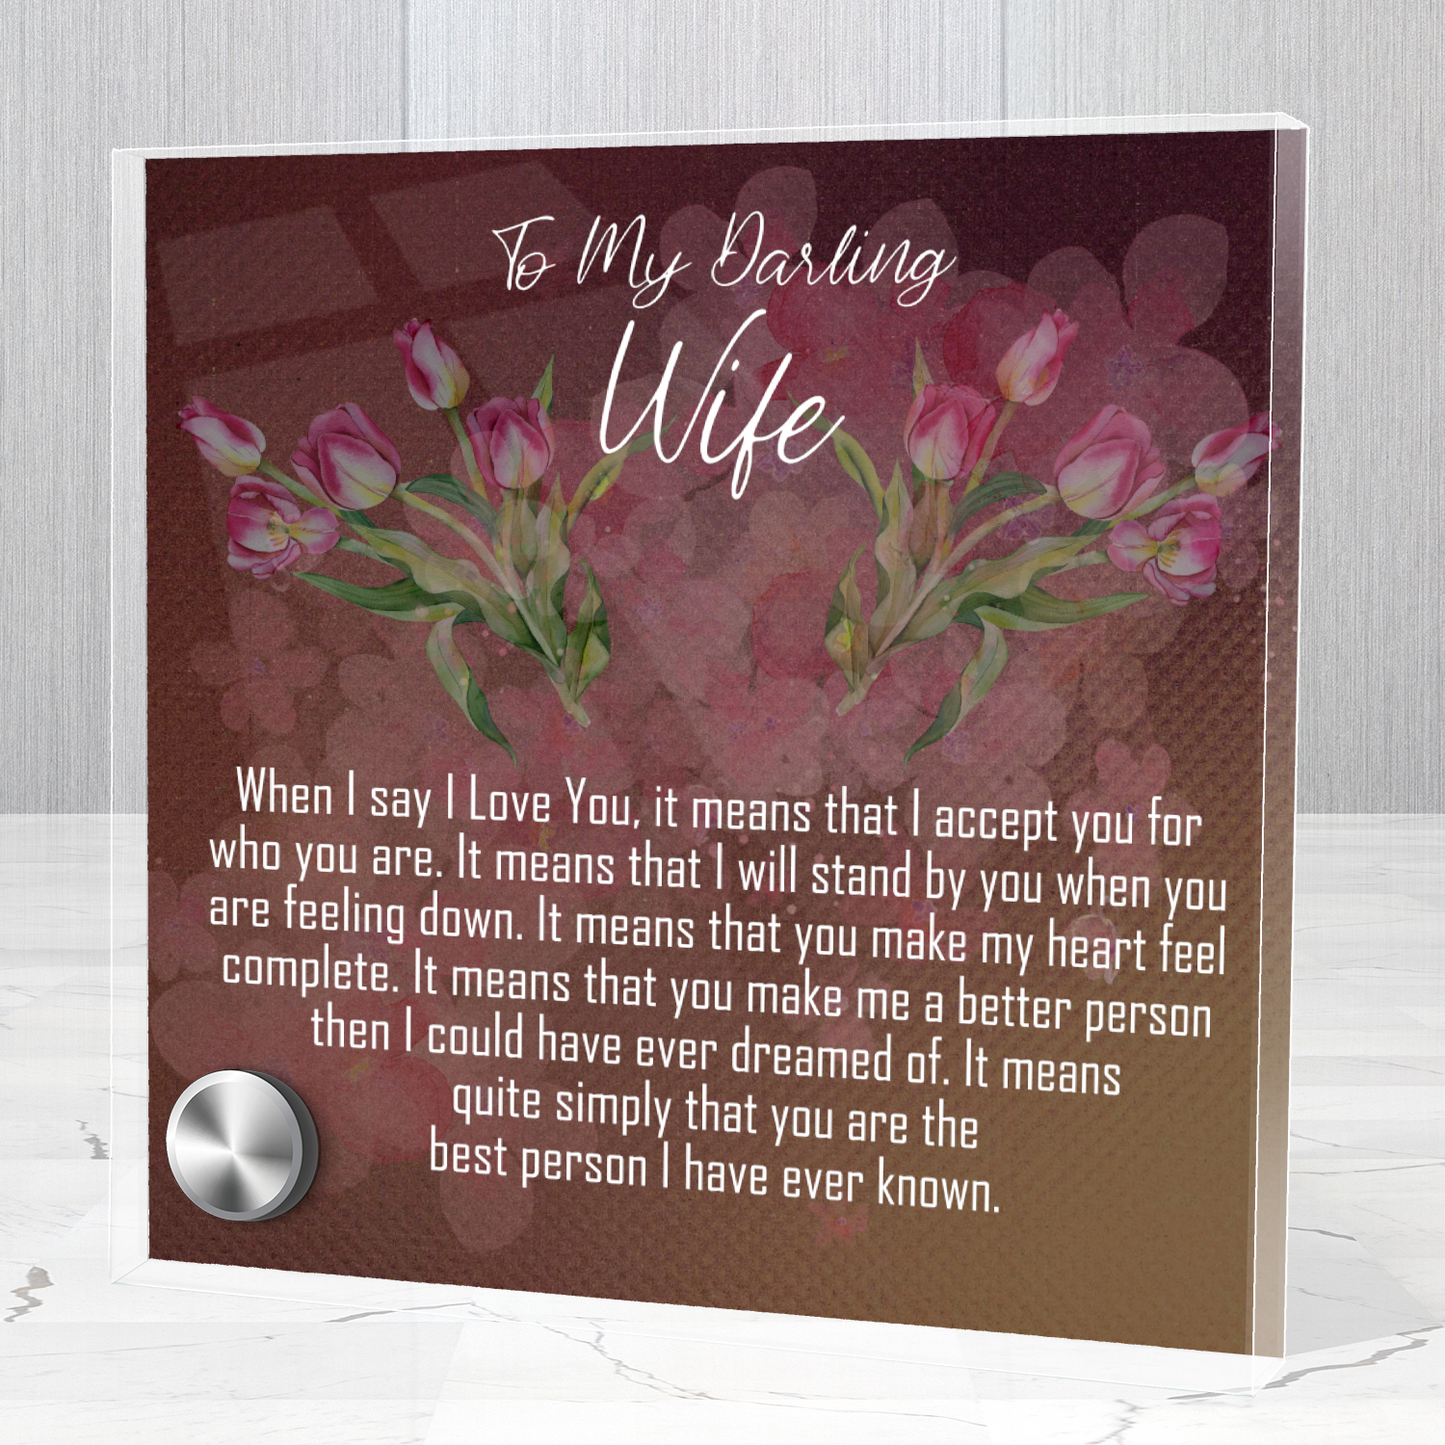 To My Darling Wife, Lumen Glass Message Display Jewelry Gift, When I Say I Love You